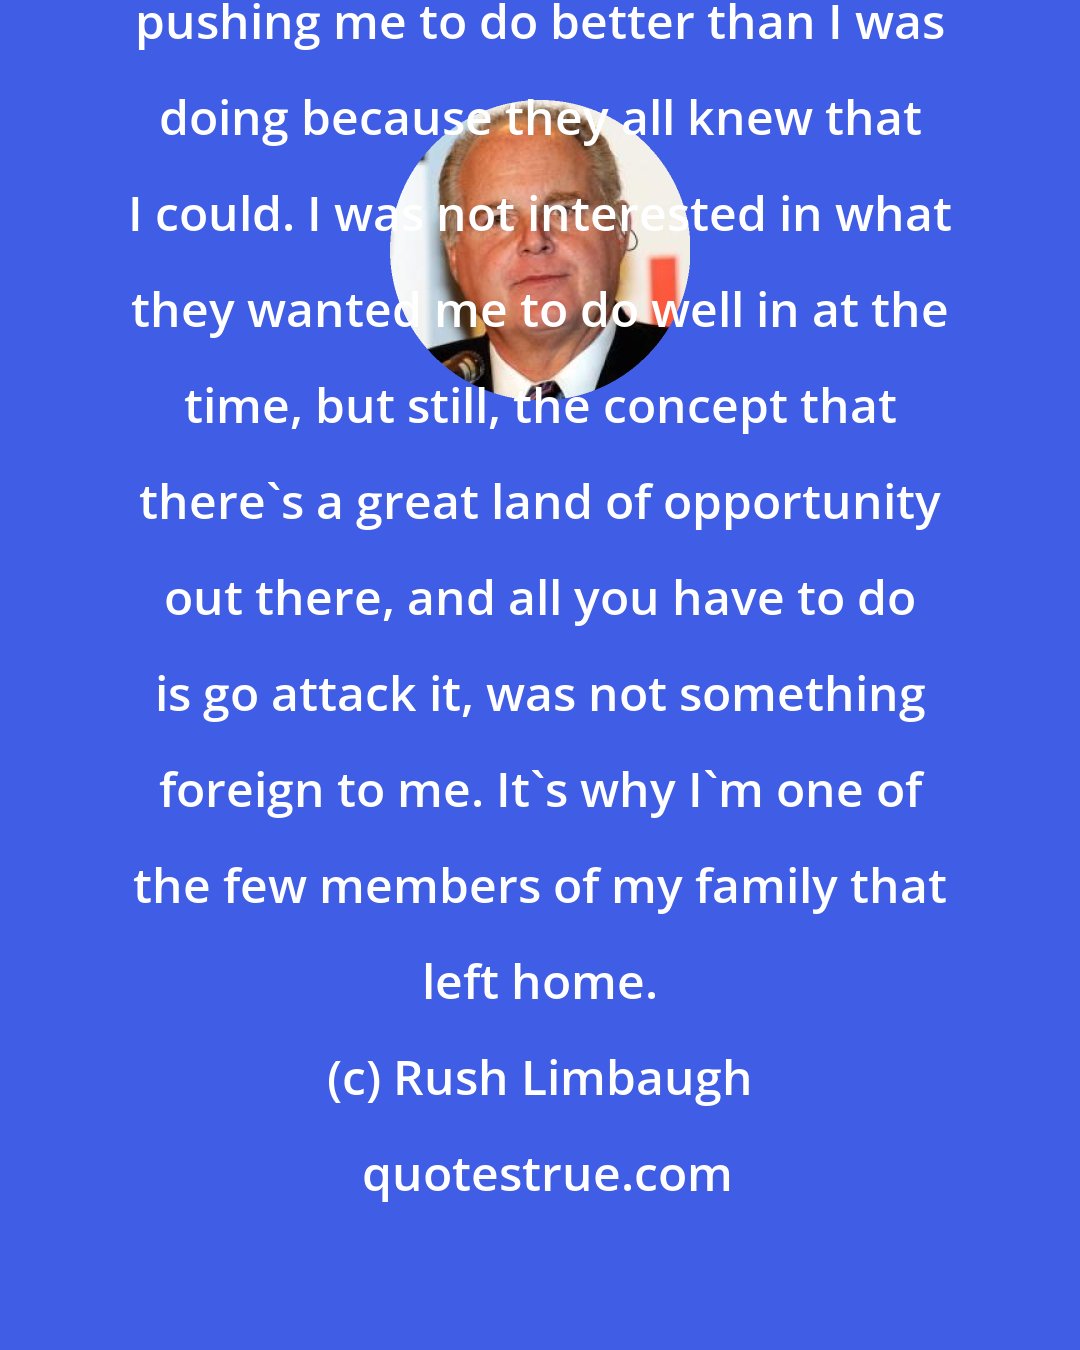 Rush Limbaugh: My dad and some teachers were constantly pushing me to do better than I was doing because they all knew that I could. I was not interested in what they wanted me to do well in at the time, but still, the concept that there's a great land of opportunity out there, and all you have to do is go attack it, was not something foreign to me. It's why I'm one of the few members of my family that left home.